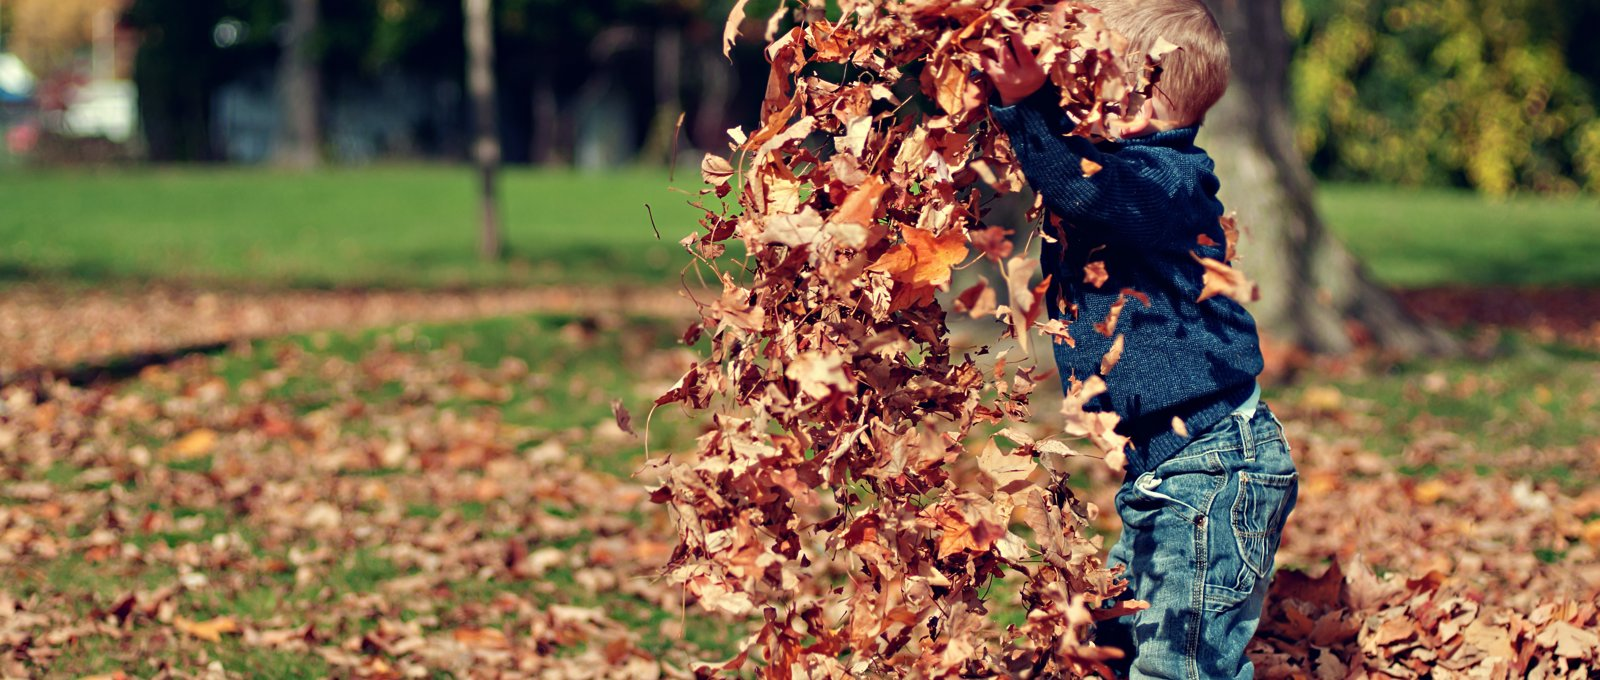 A small child playing in autumn leaves.